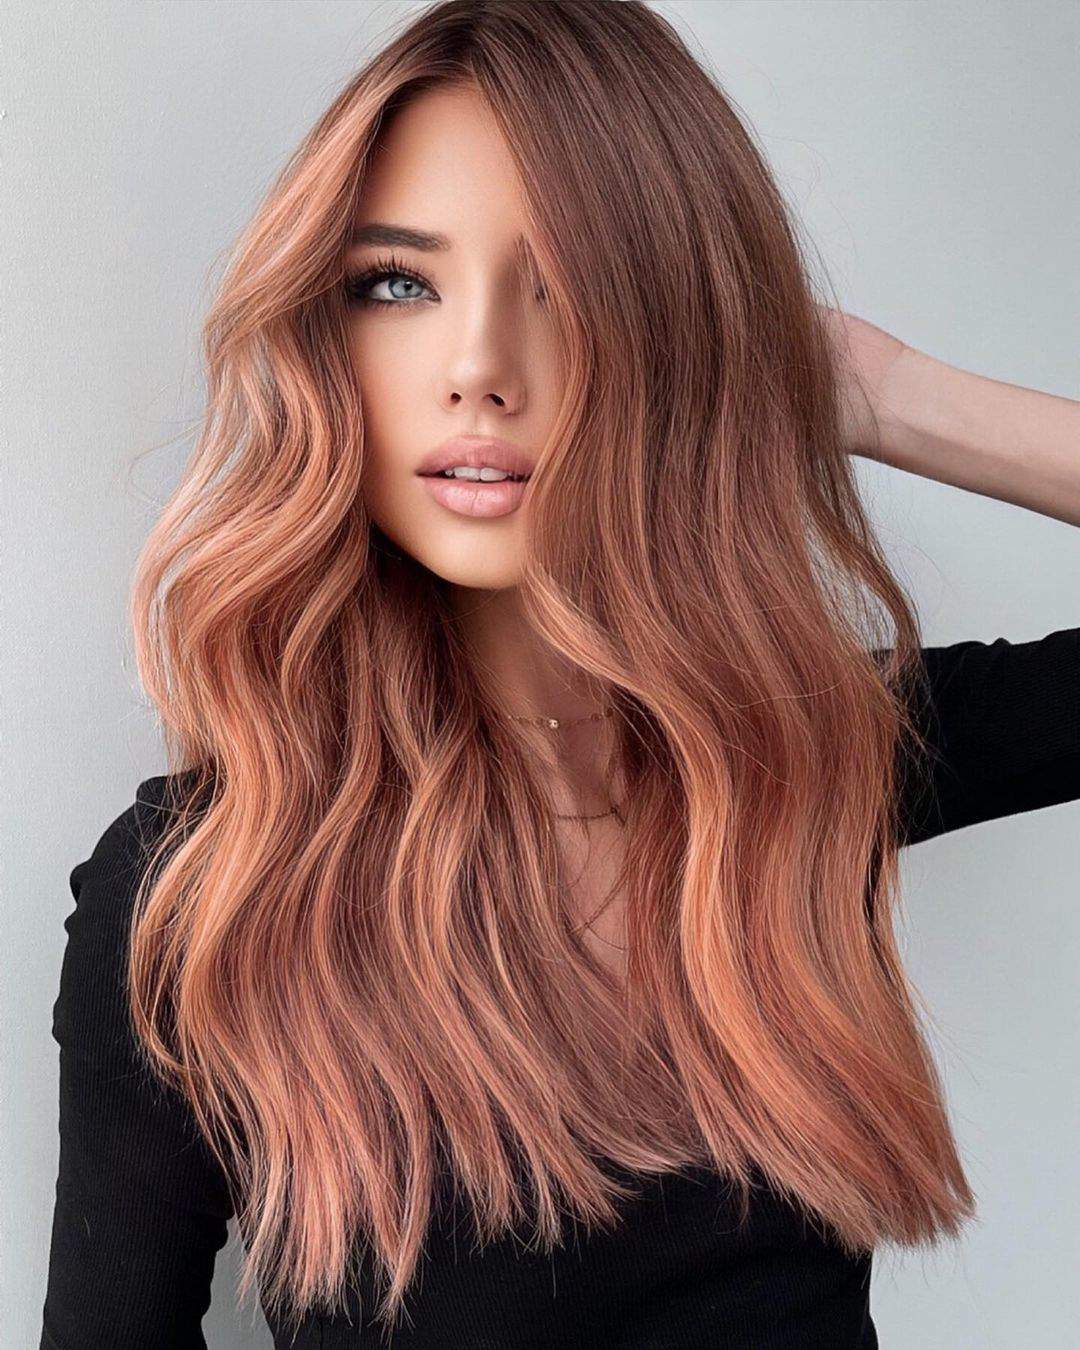 40 Greatest Long Hairstyles For Women With Long Hair In 2021 images 19